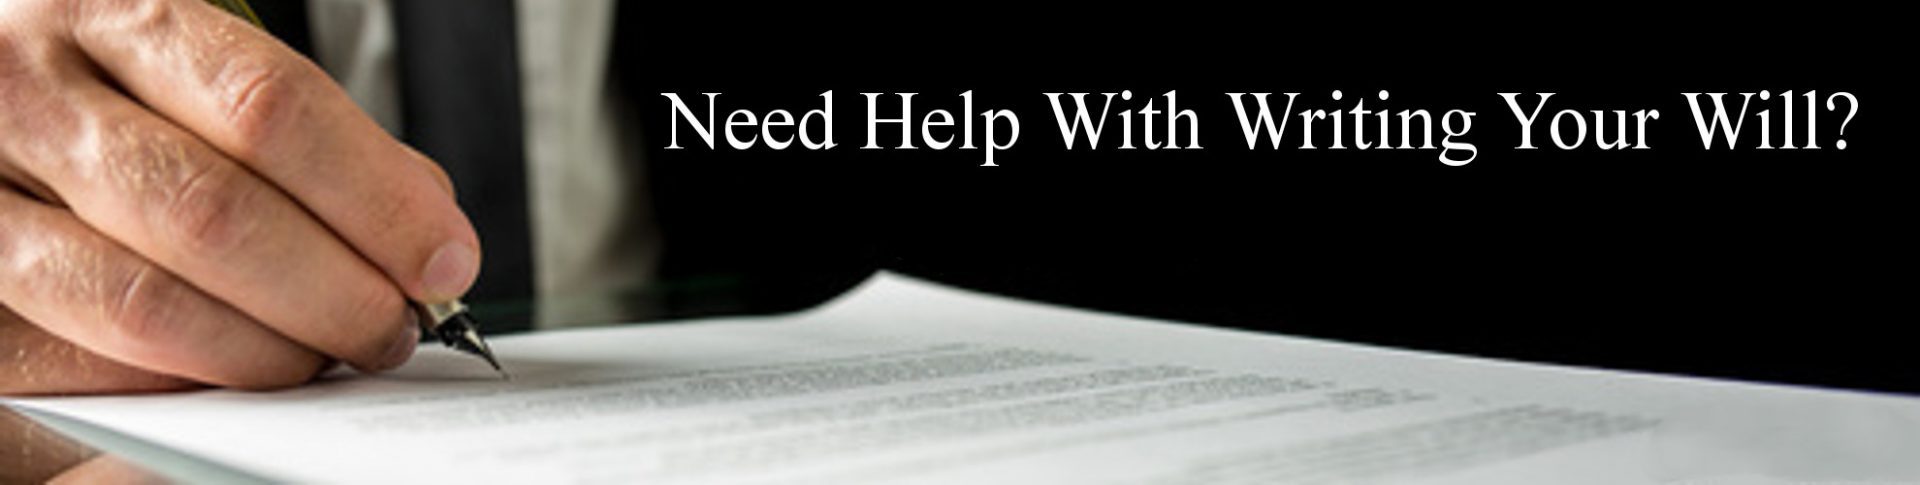 Need Help Writing Your Will?